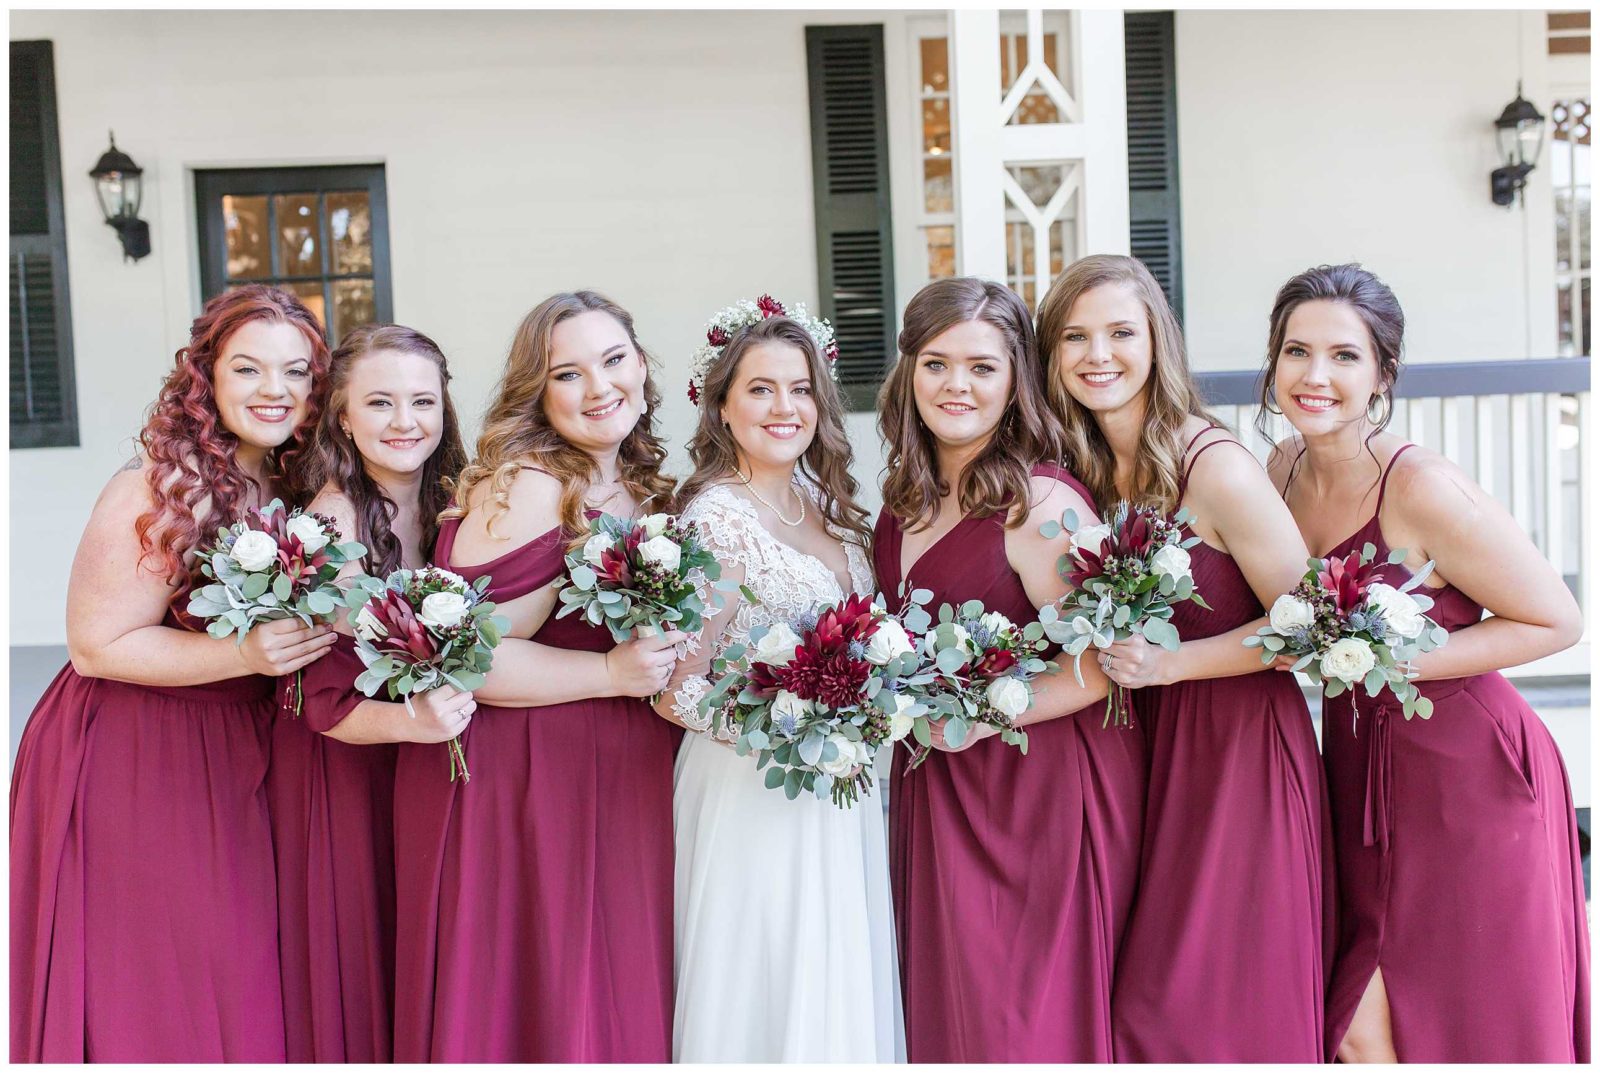 Southern Fall Wedding at The Historic White Home in Rock Hill | Yessica ...